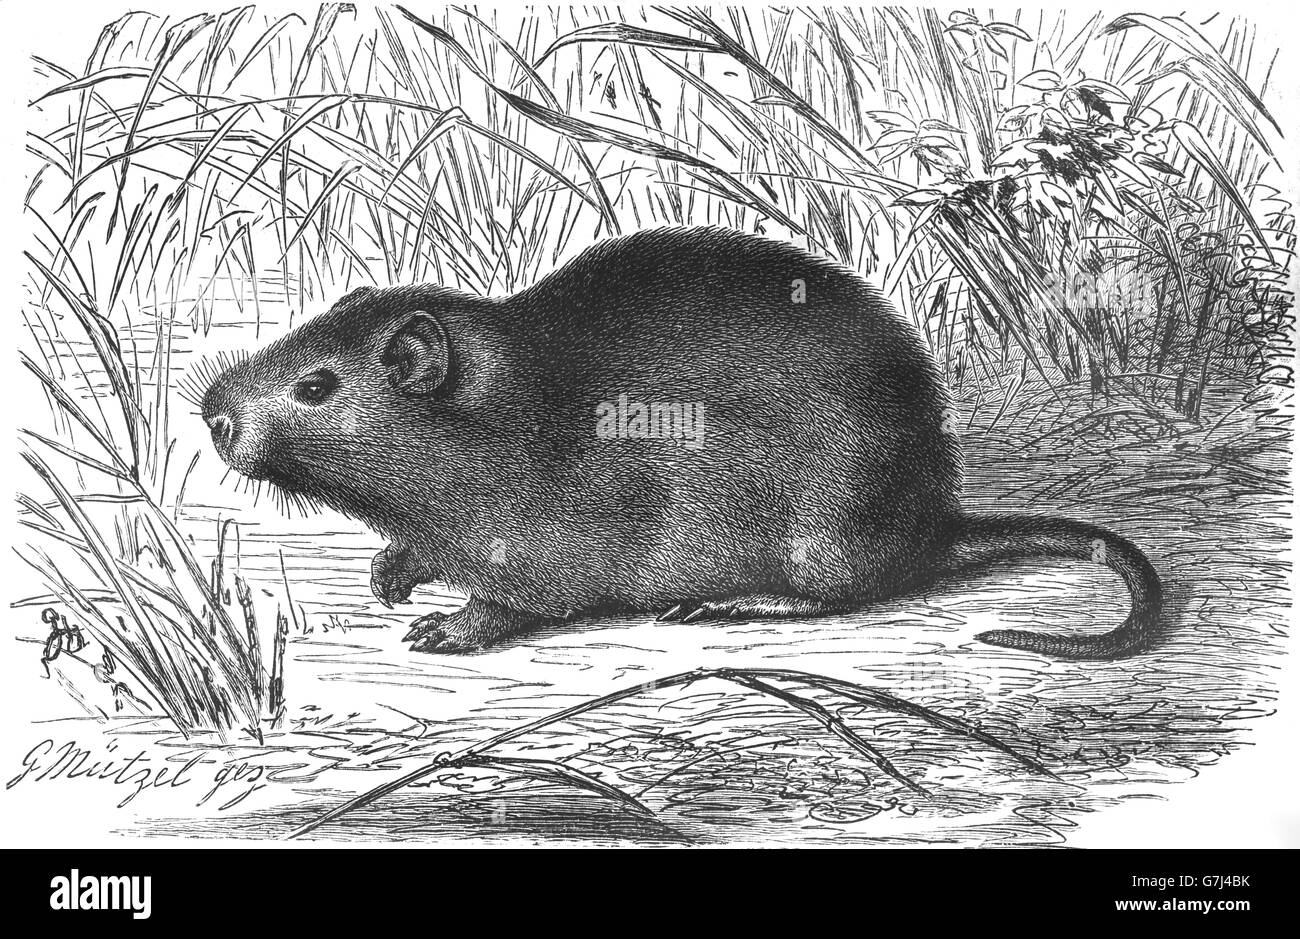 Greater cane rat, Thryonomys swinderianus, illustration from book dated 1904 Stock Photo